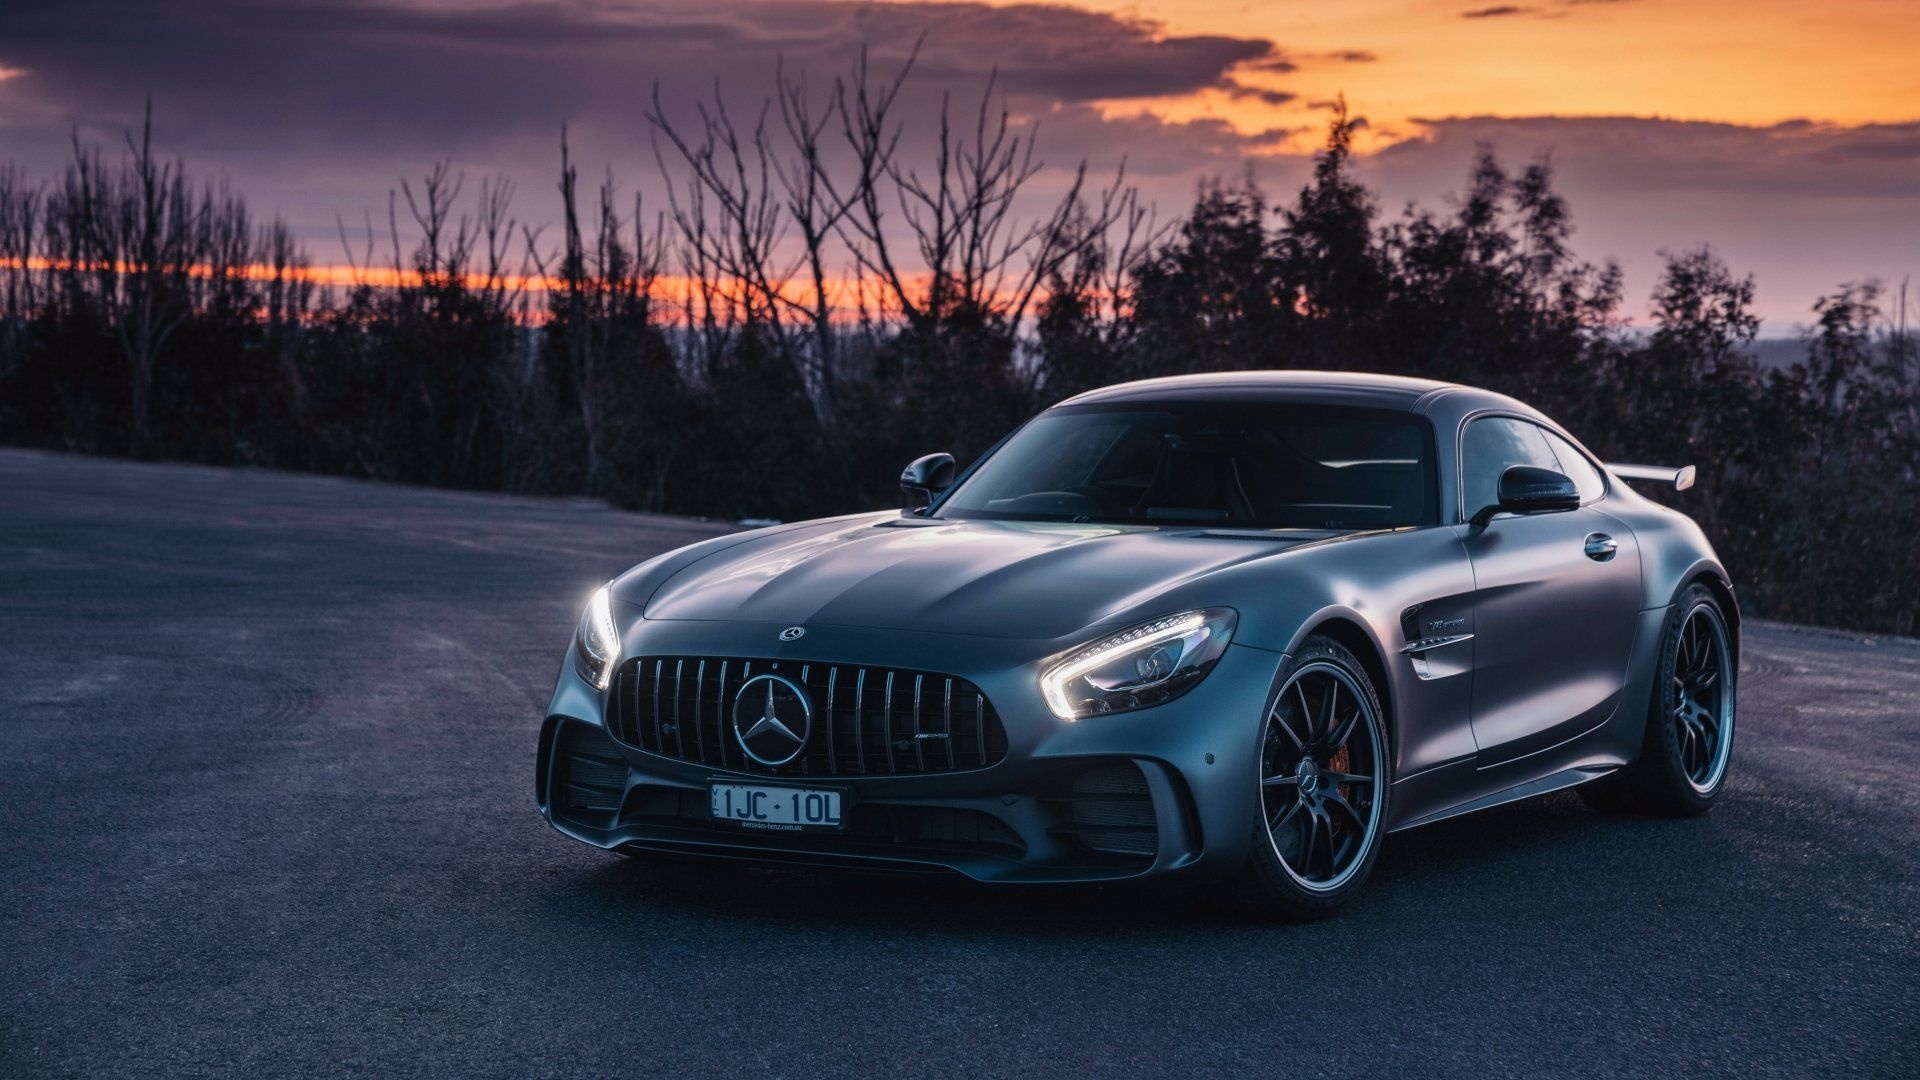 Mercedes-Benz AMG GT, High-resolution imagery, Jaw-dropping visuals, Ultra HD quality, 1920x1080 Full HD Desktop